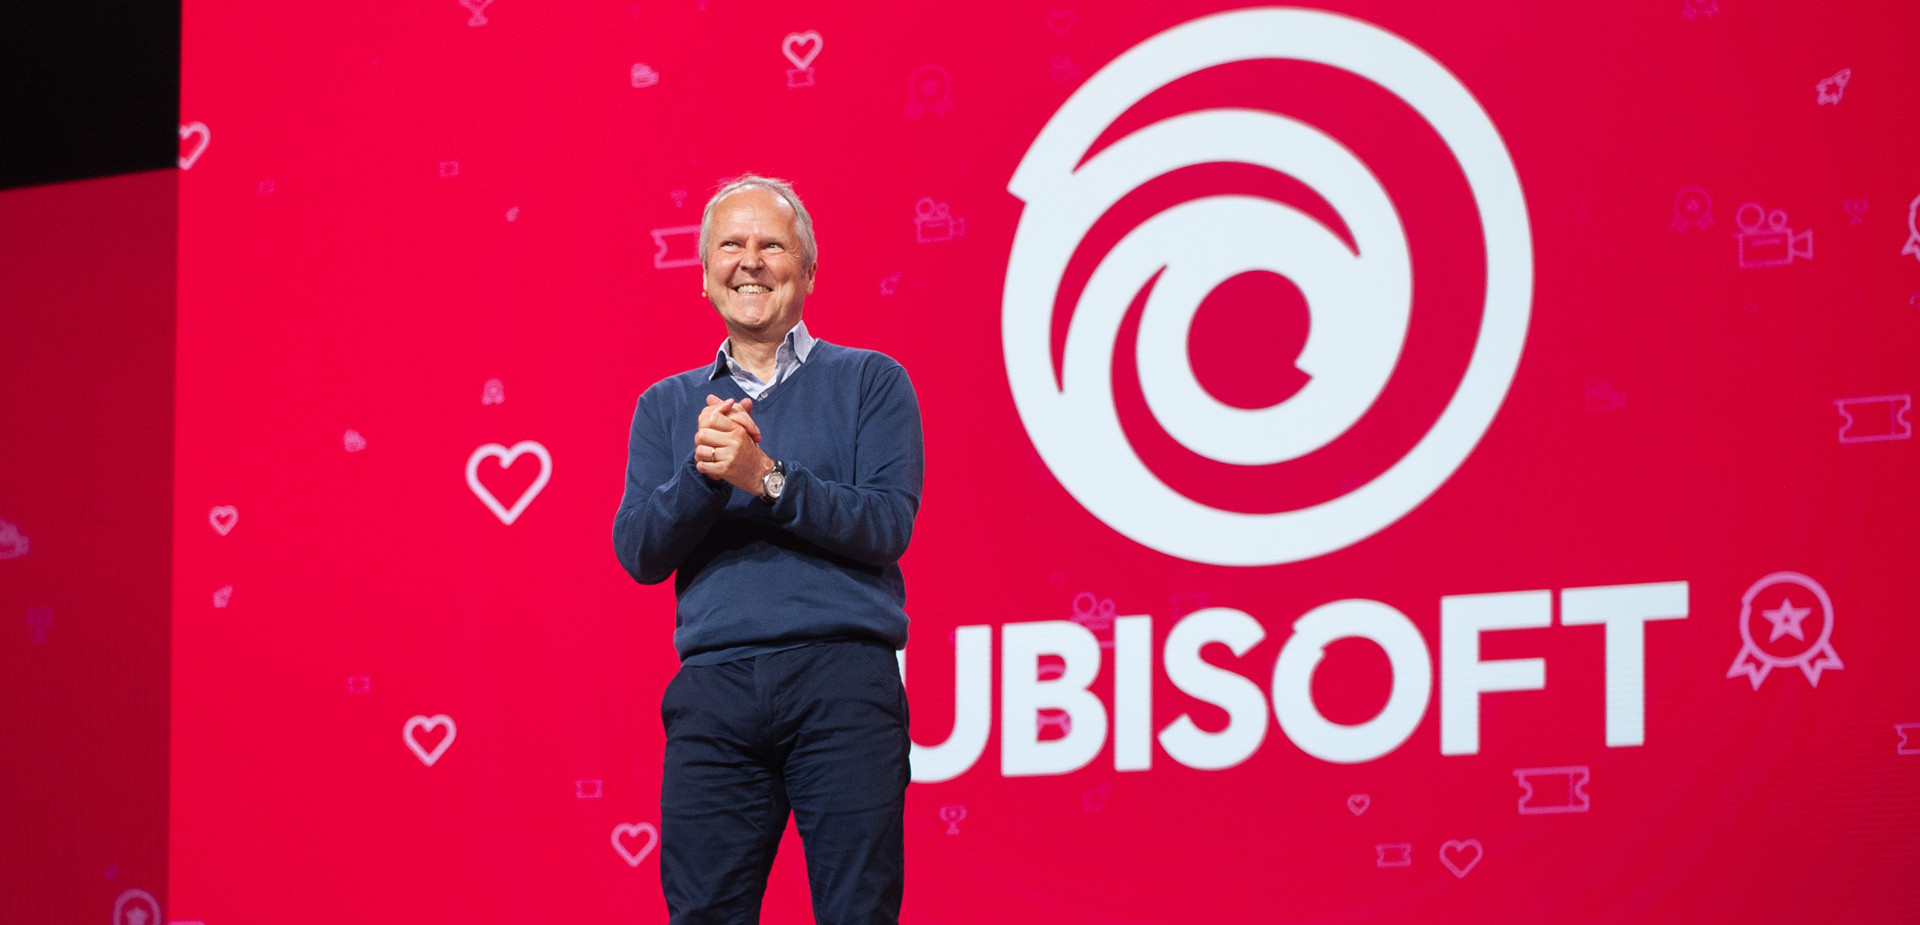 Ubisoft’s CEO reportedly tells staff the onus is on them to
reverse the company’s fortunes